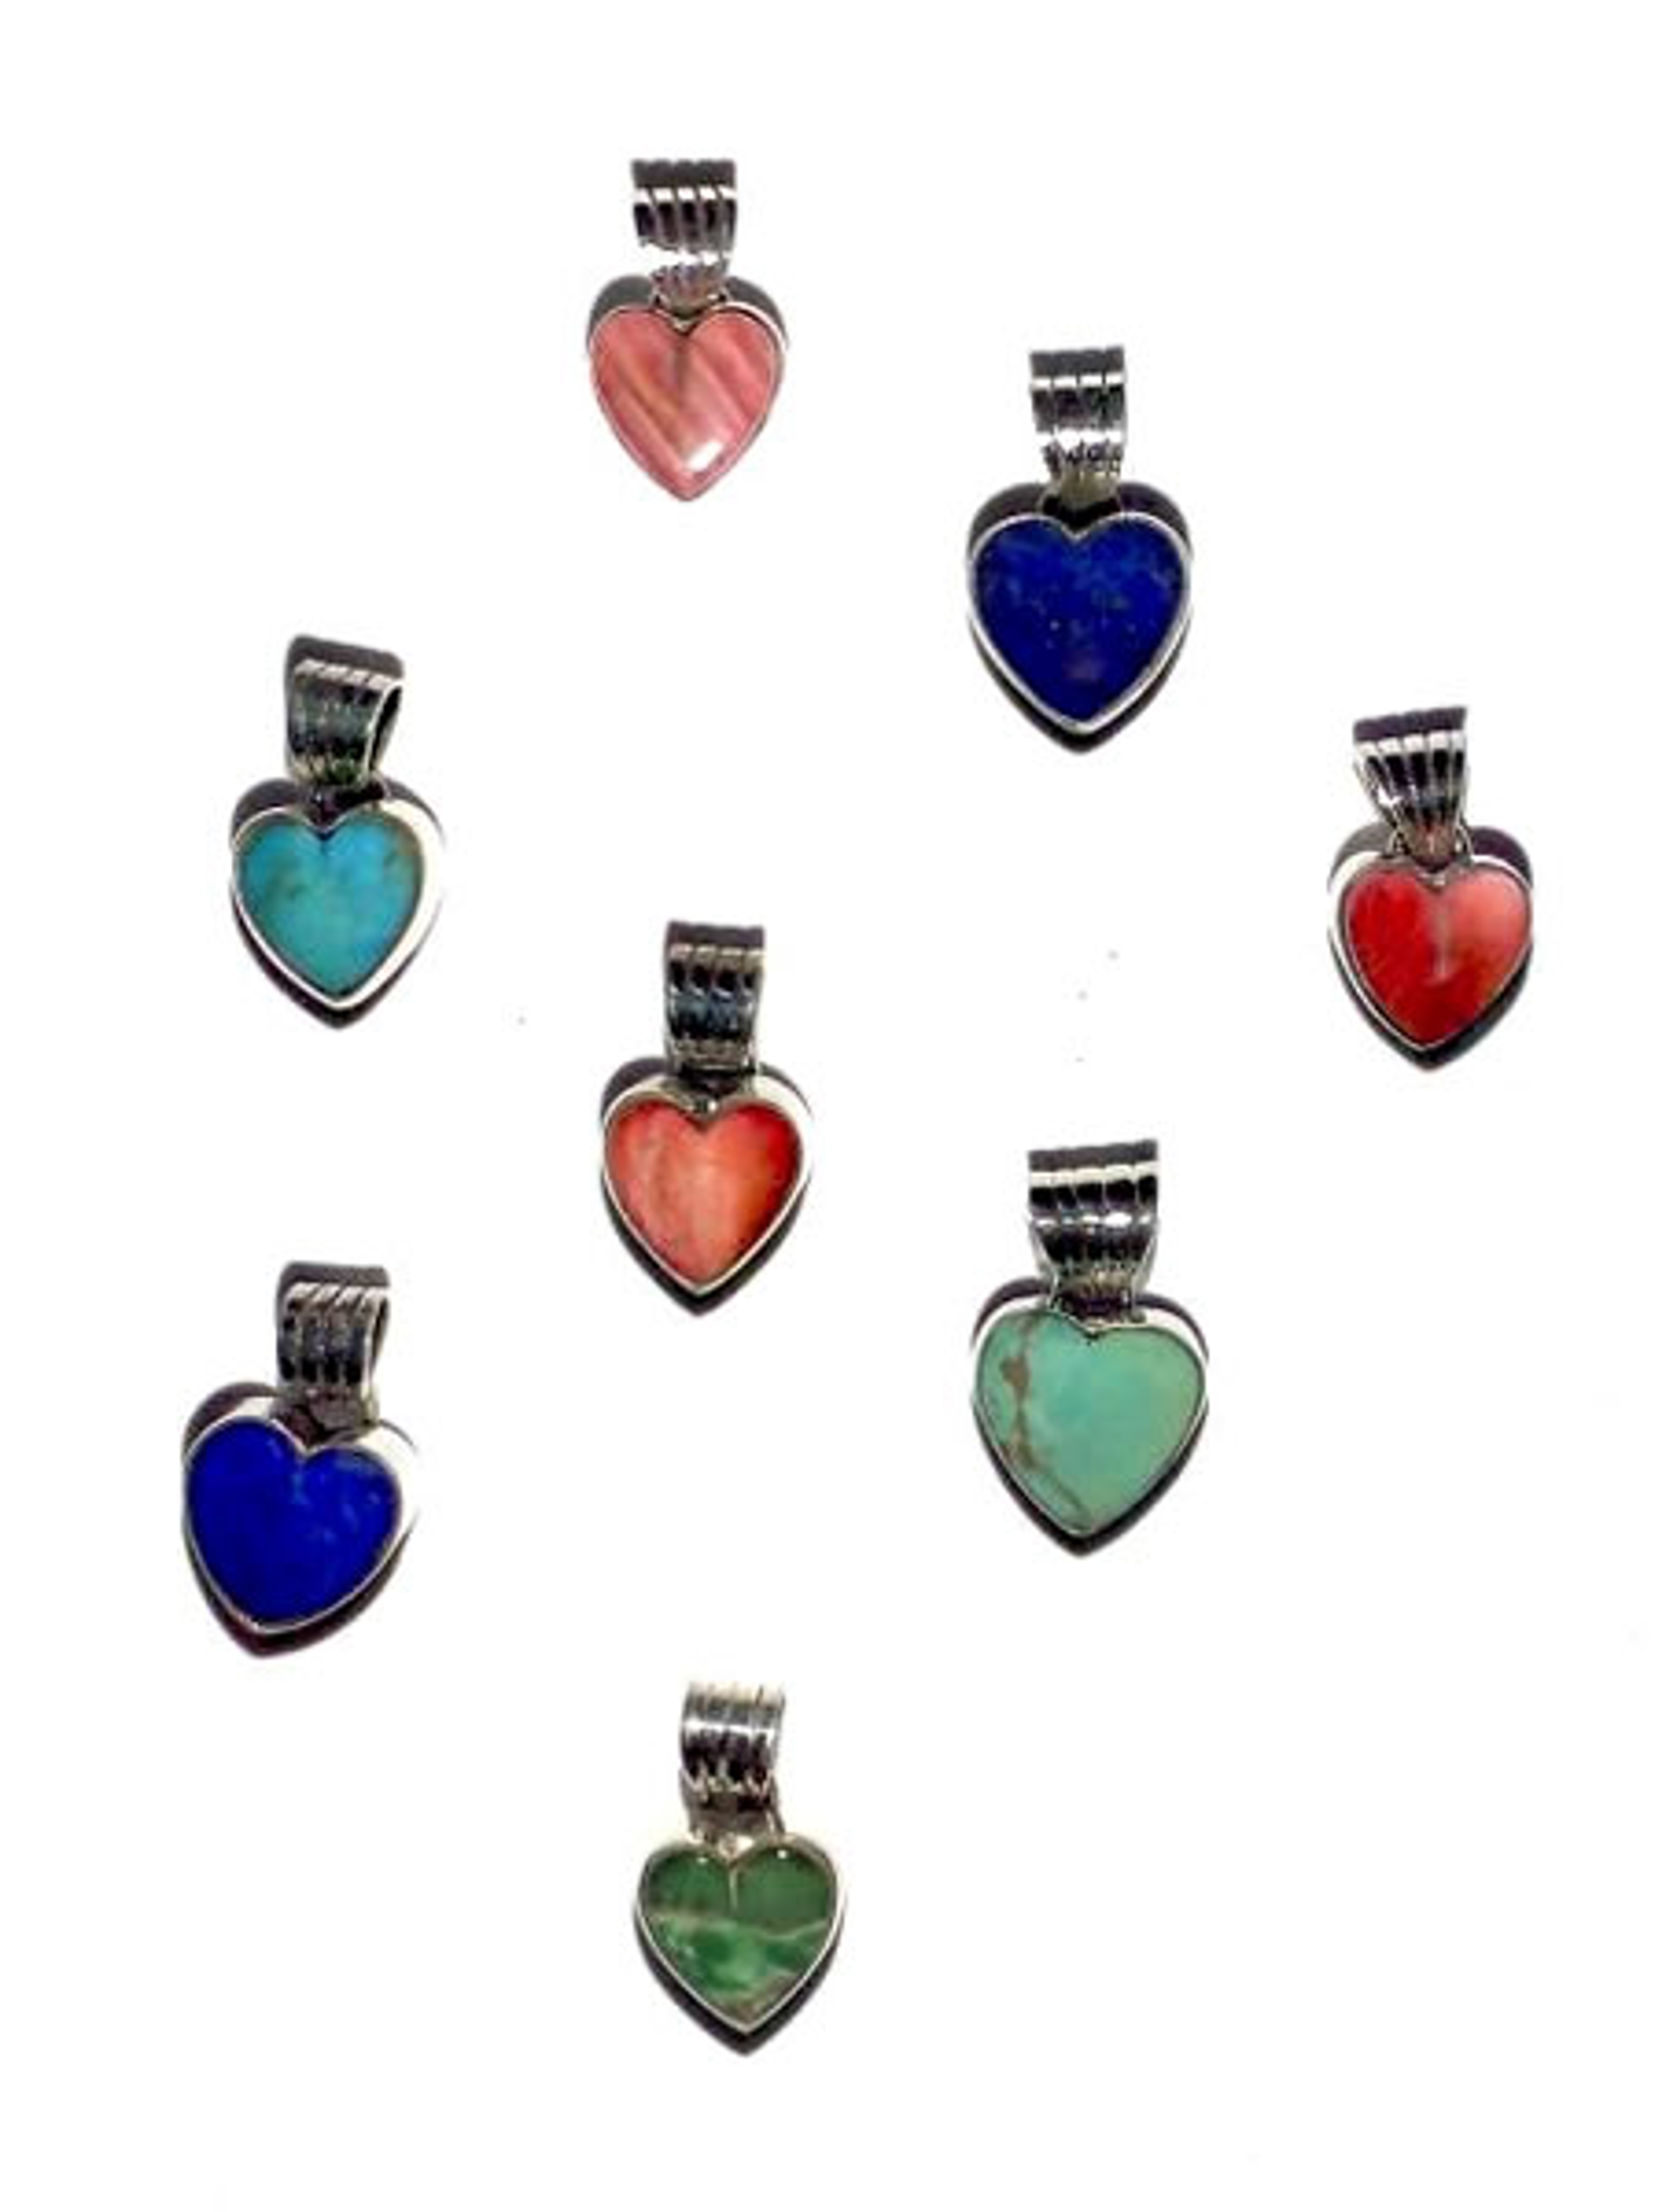 Pendant - Sterling Silver & Turquoise Hearts by Dan Dodson